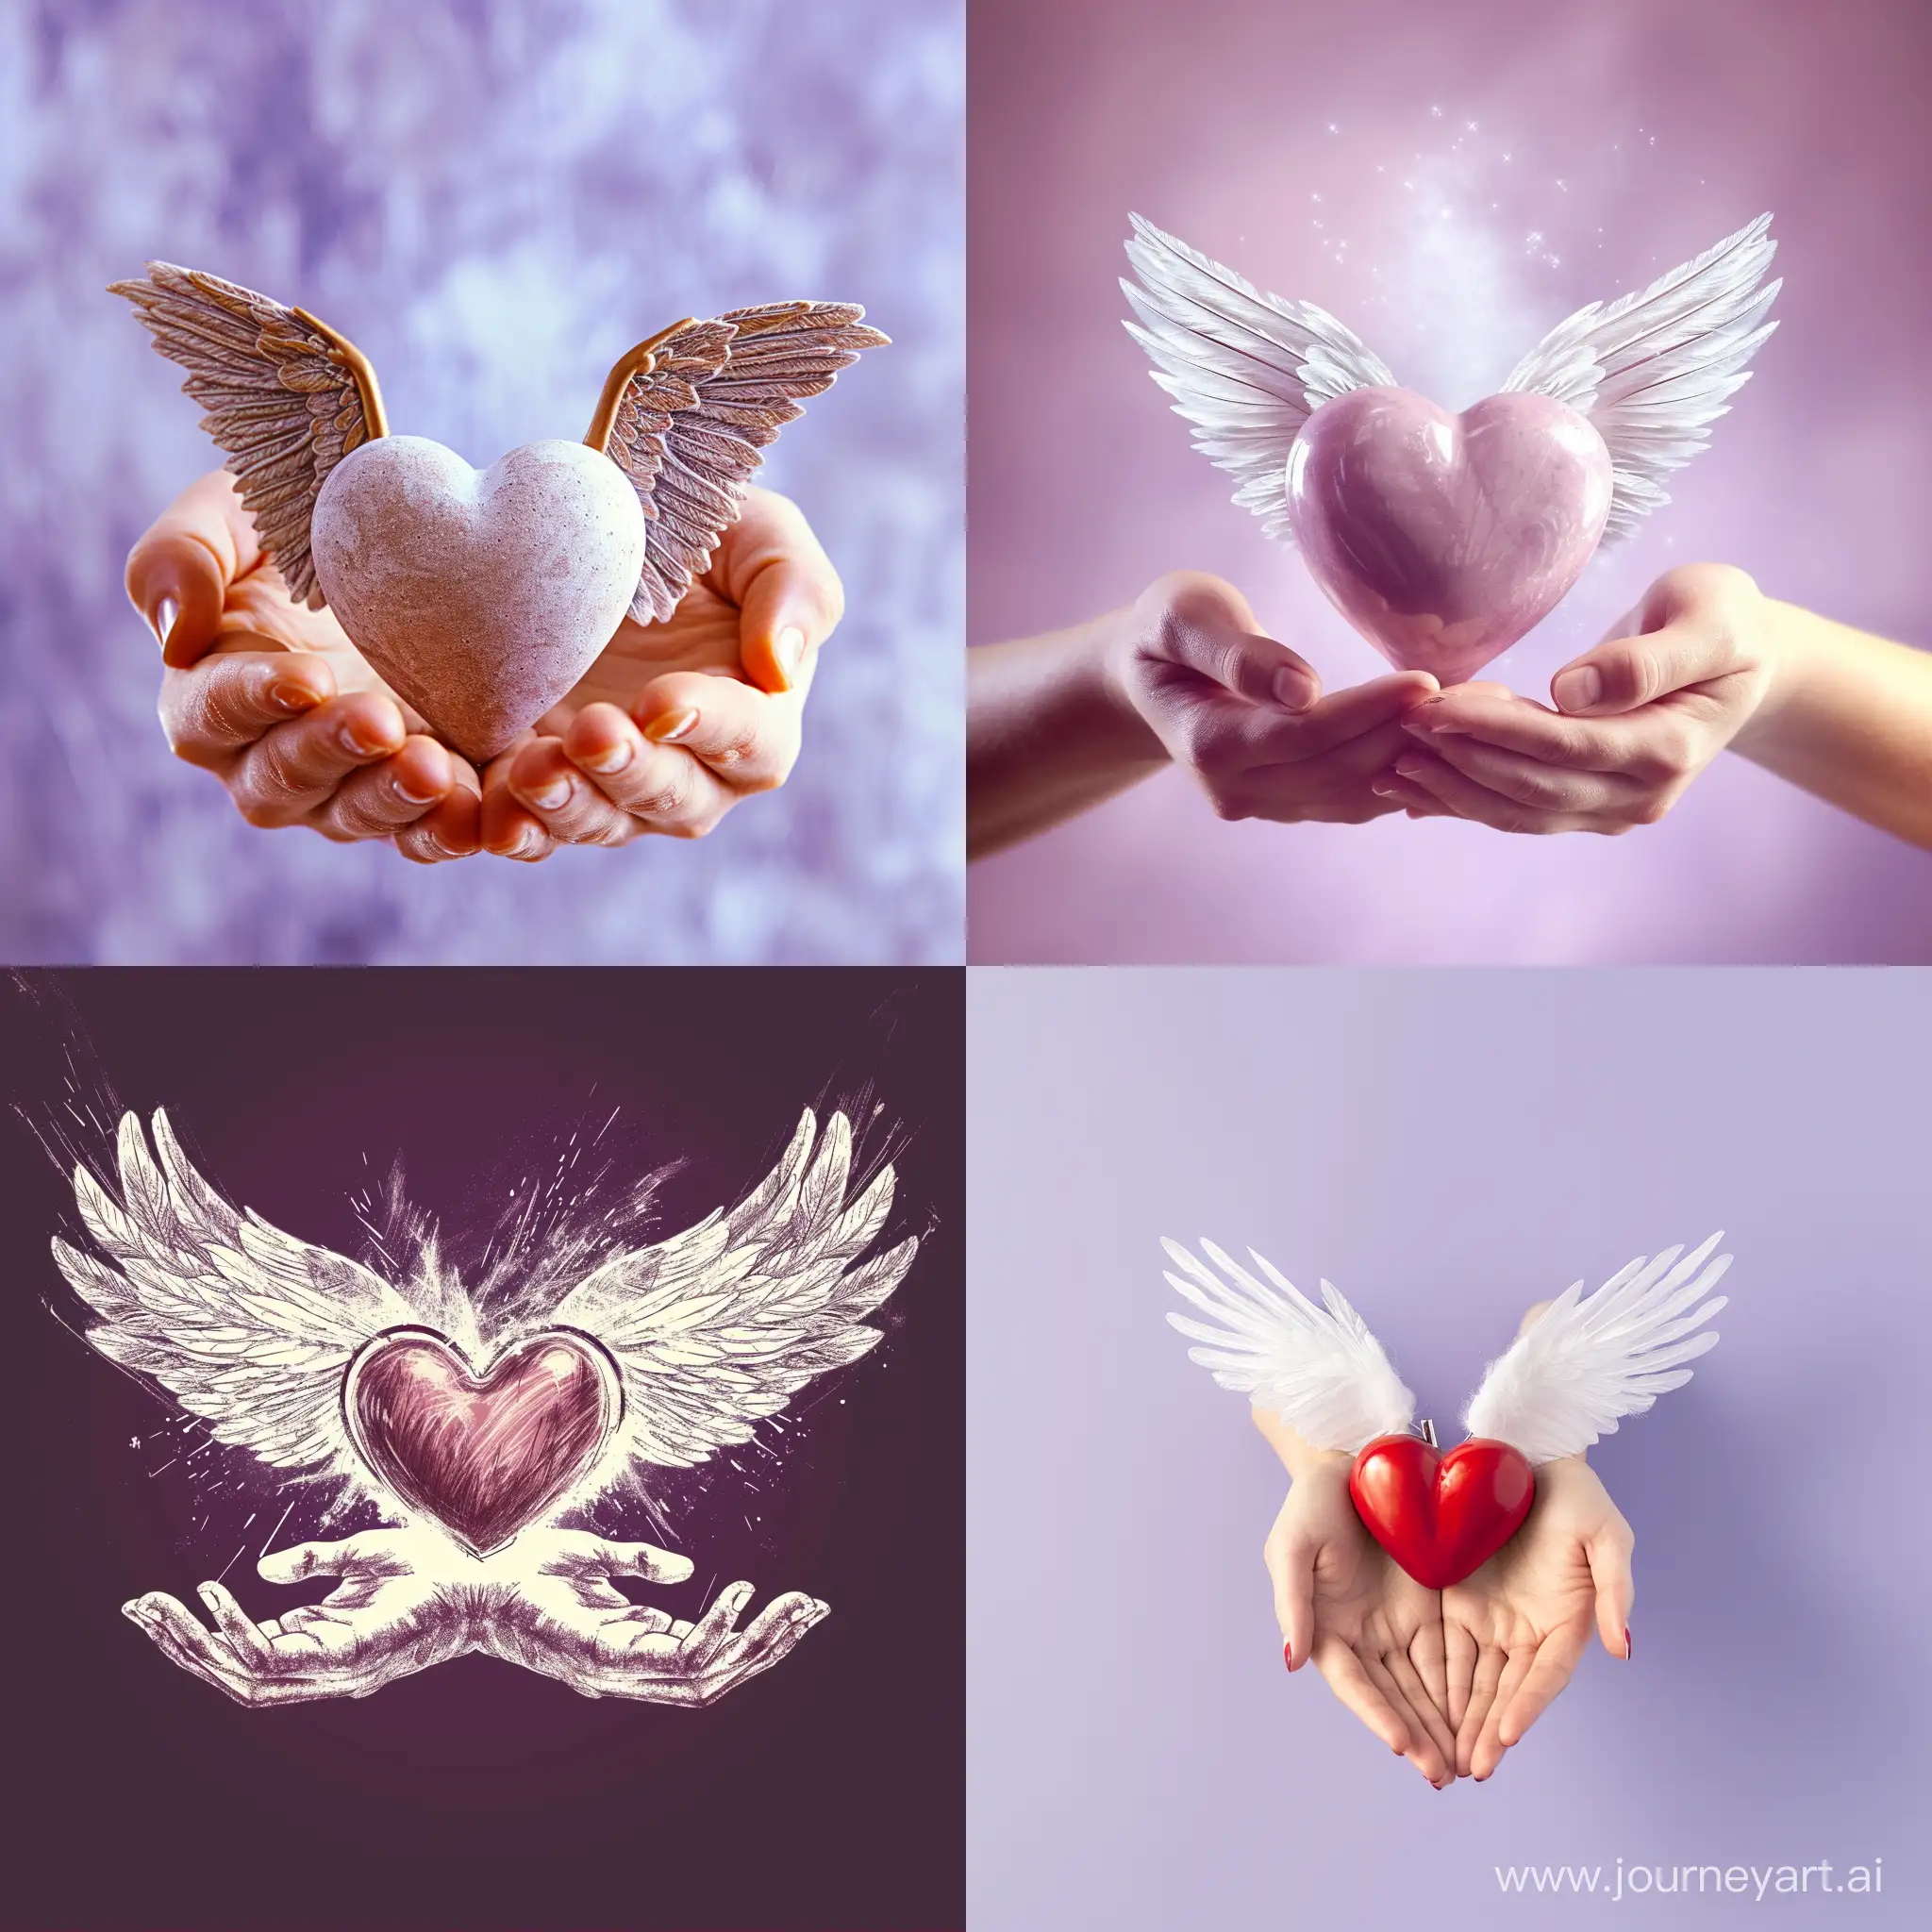 Palms-Holding-Heart-with-Wings-Expressing-Love-and-Gratitude-on-a-Neutral-Purple-Background